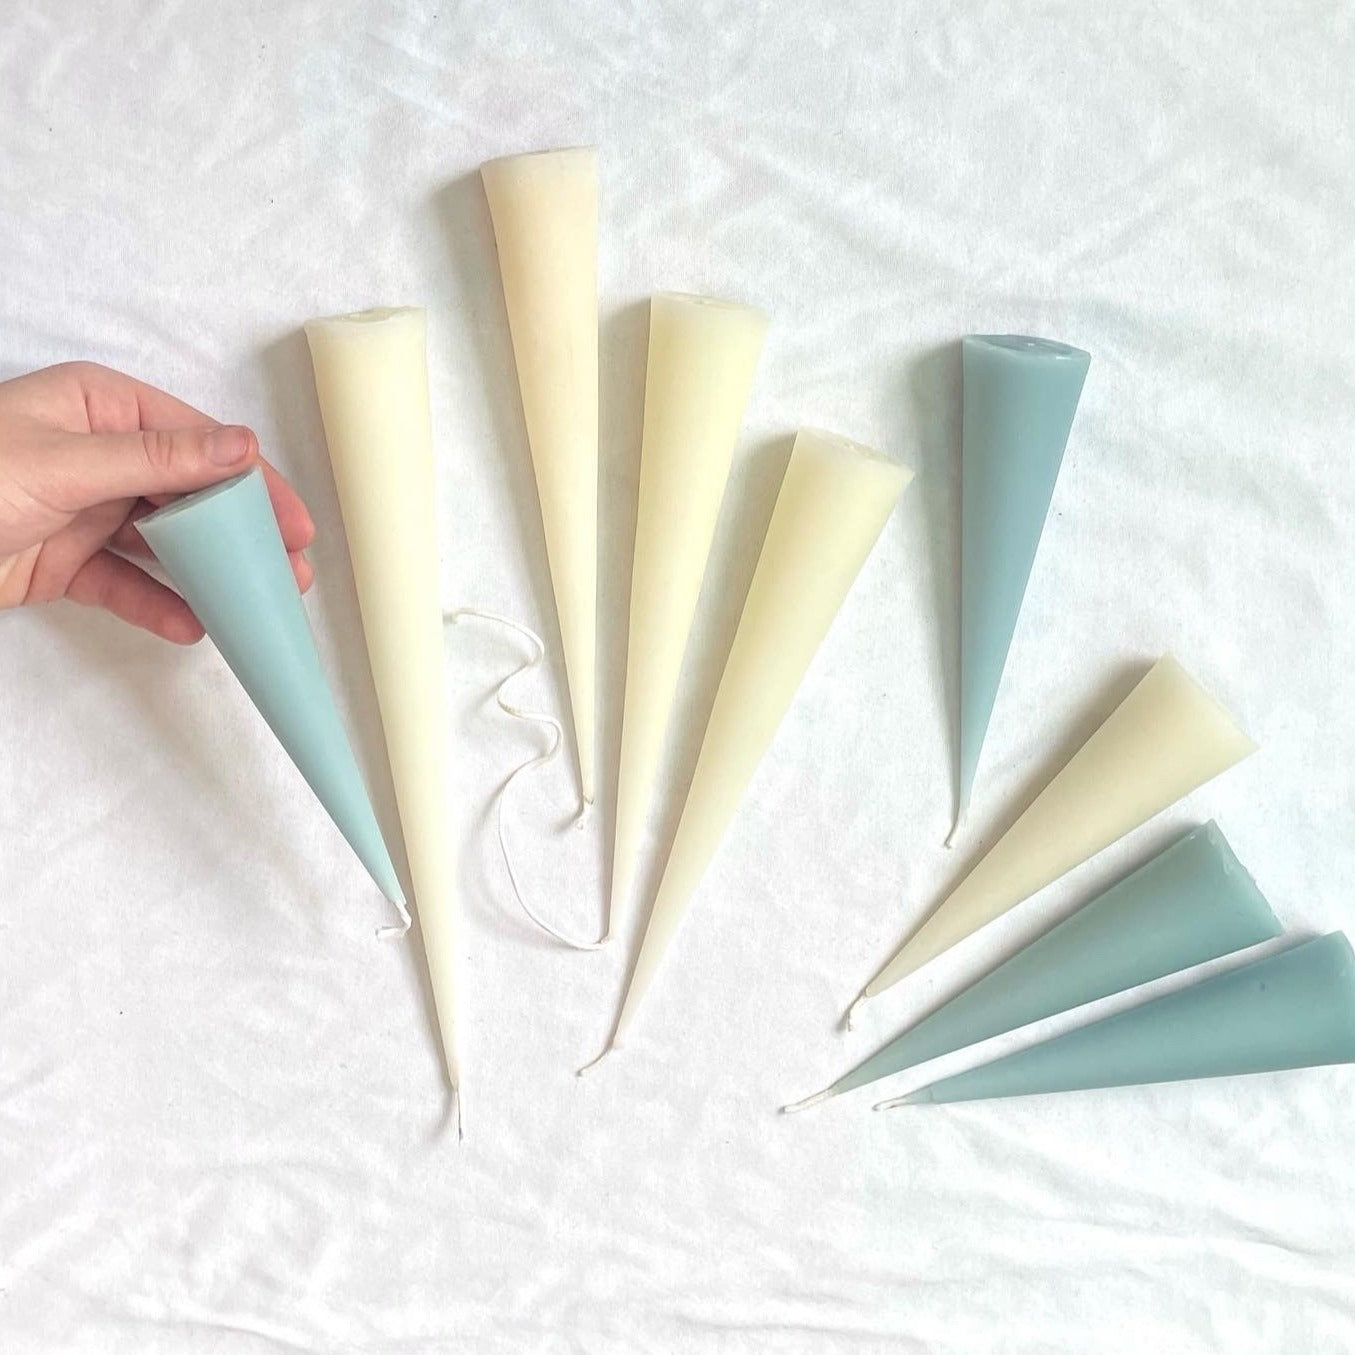 Icicle Beeswax Cones - Light Blue Cone Candle - Beeswax, Candle, Hygge in 6", 8", 10" and 12"